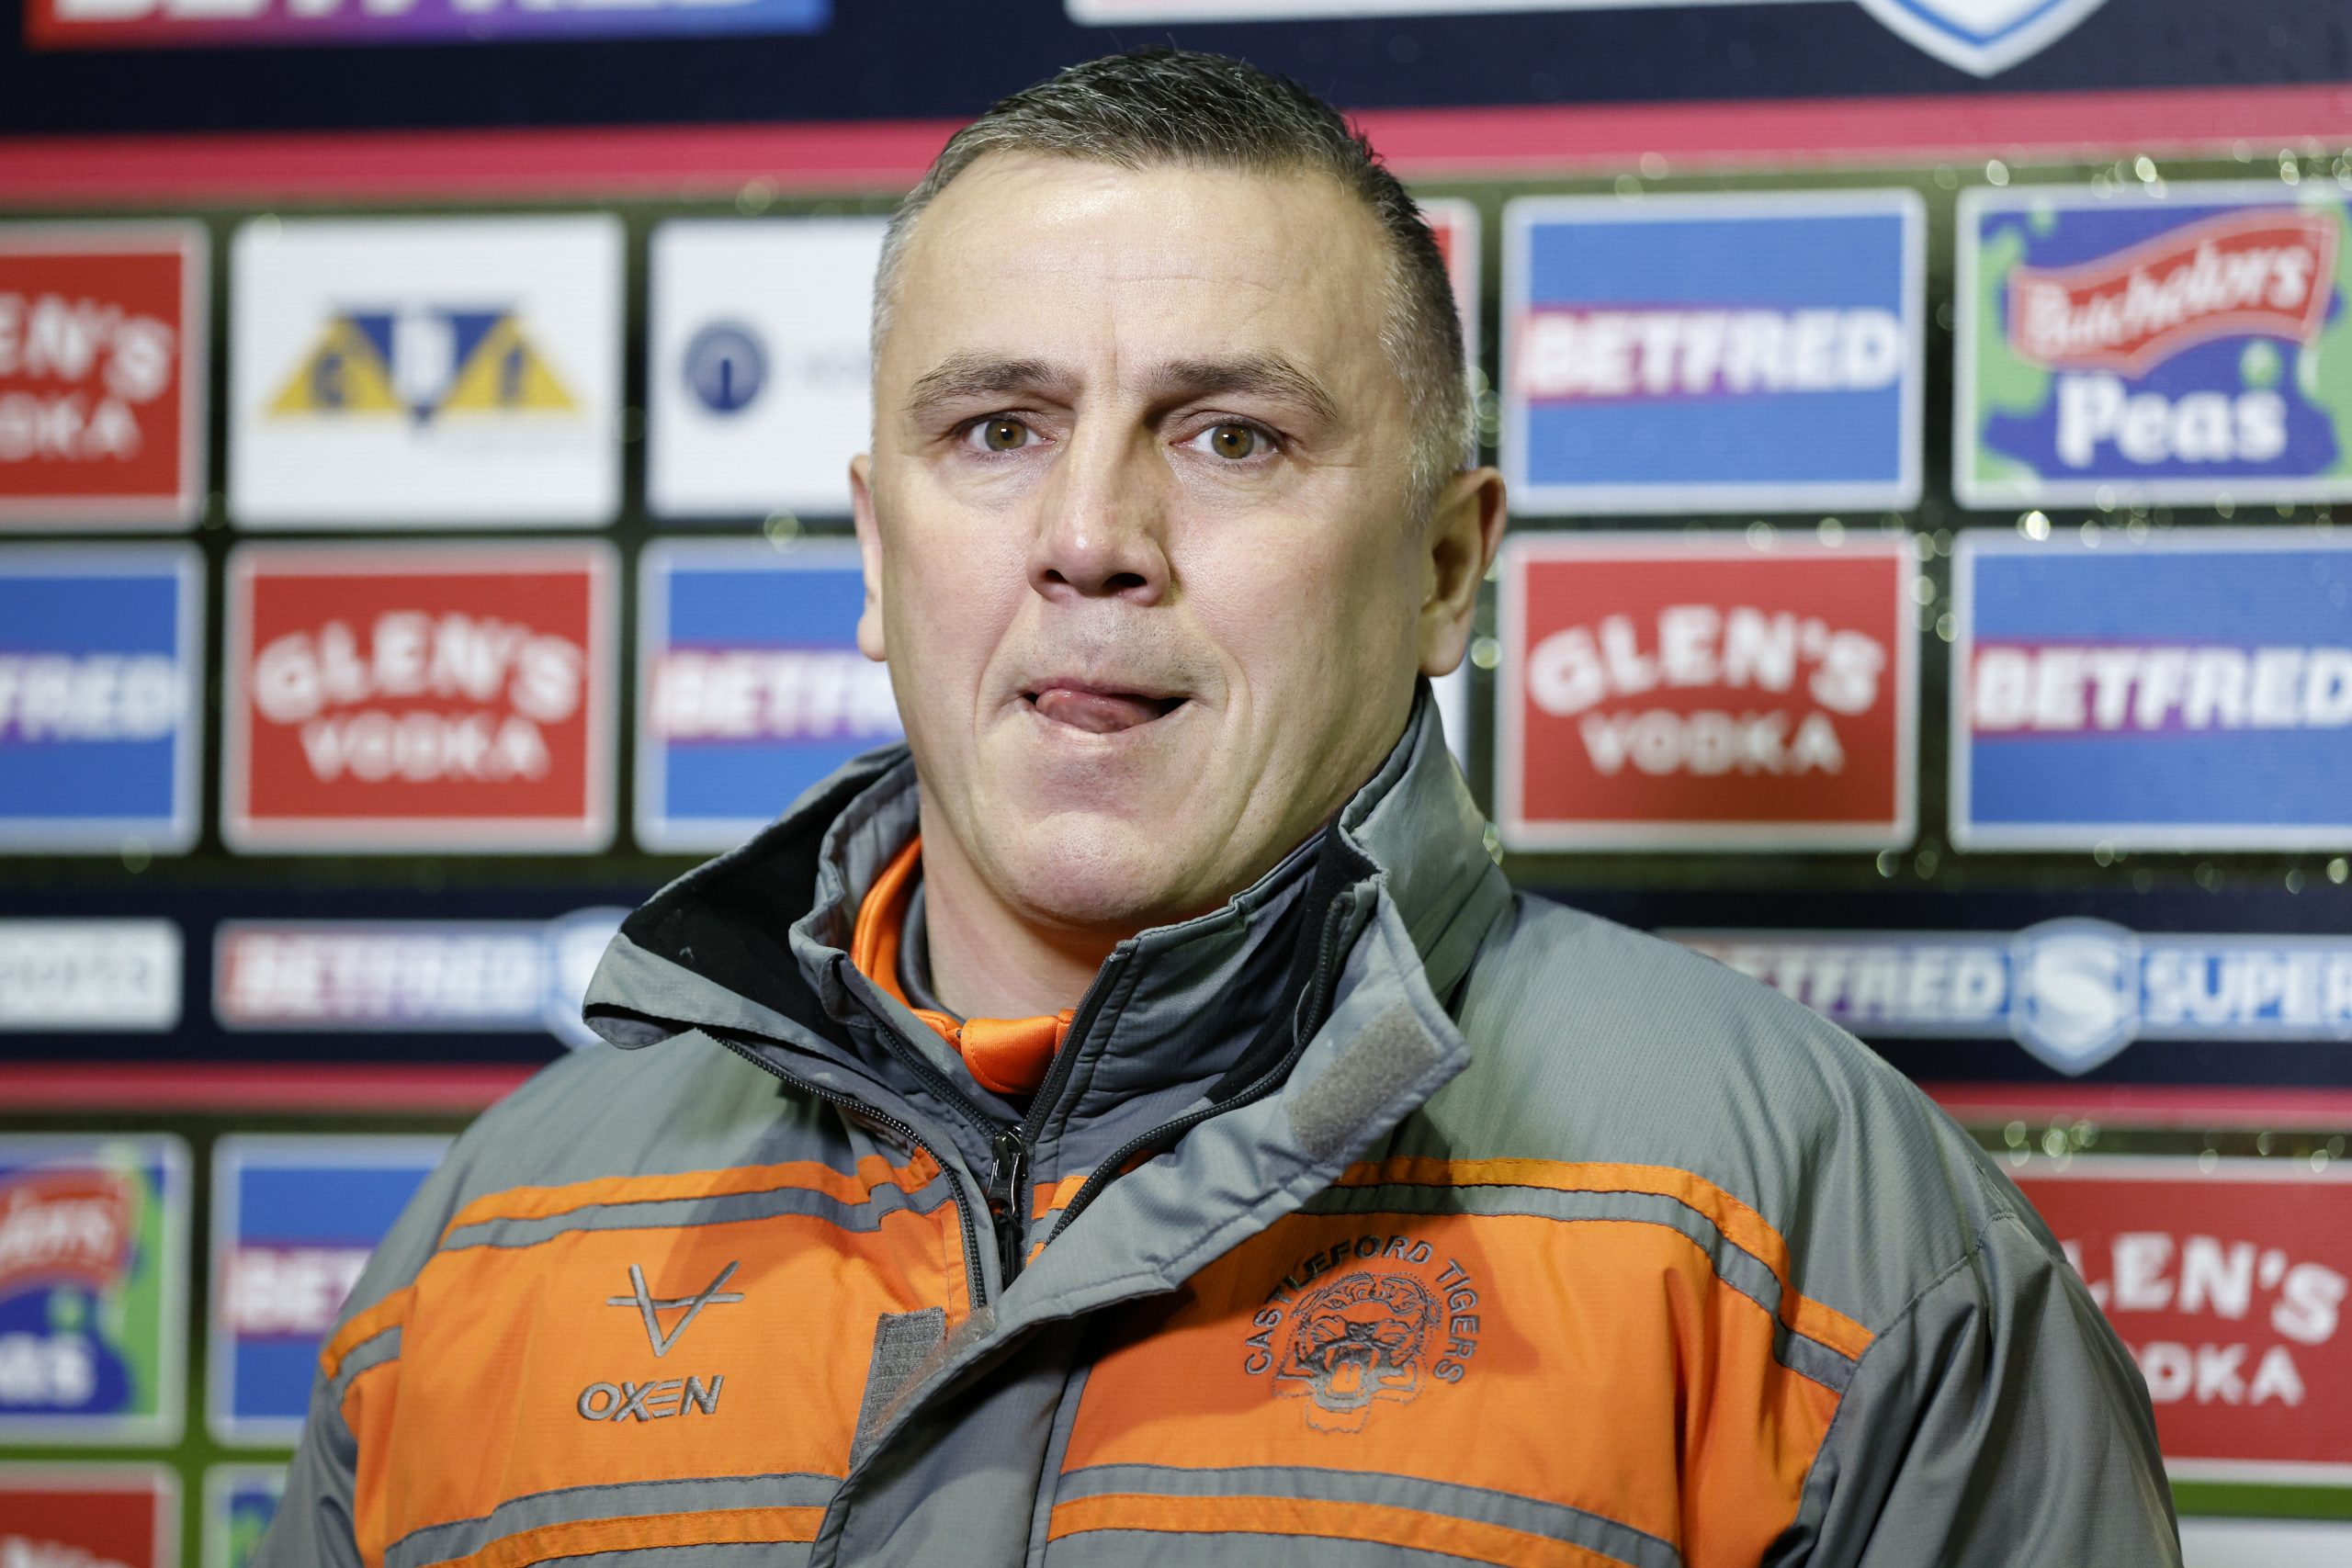 Castleford appoint Andy Last as new head coach on two-and-a-half-year contract